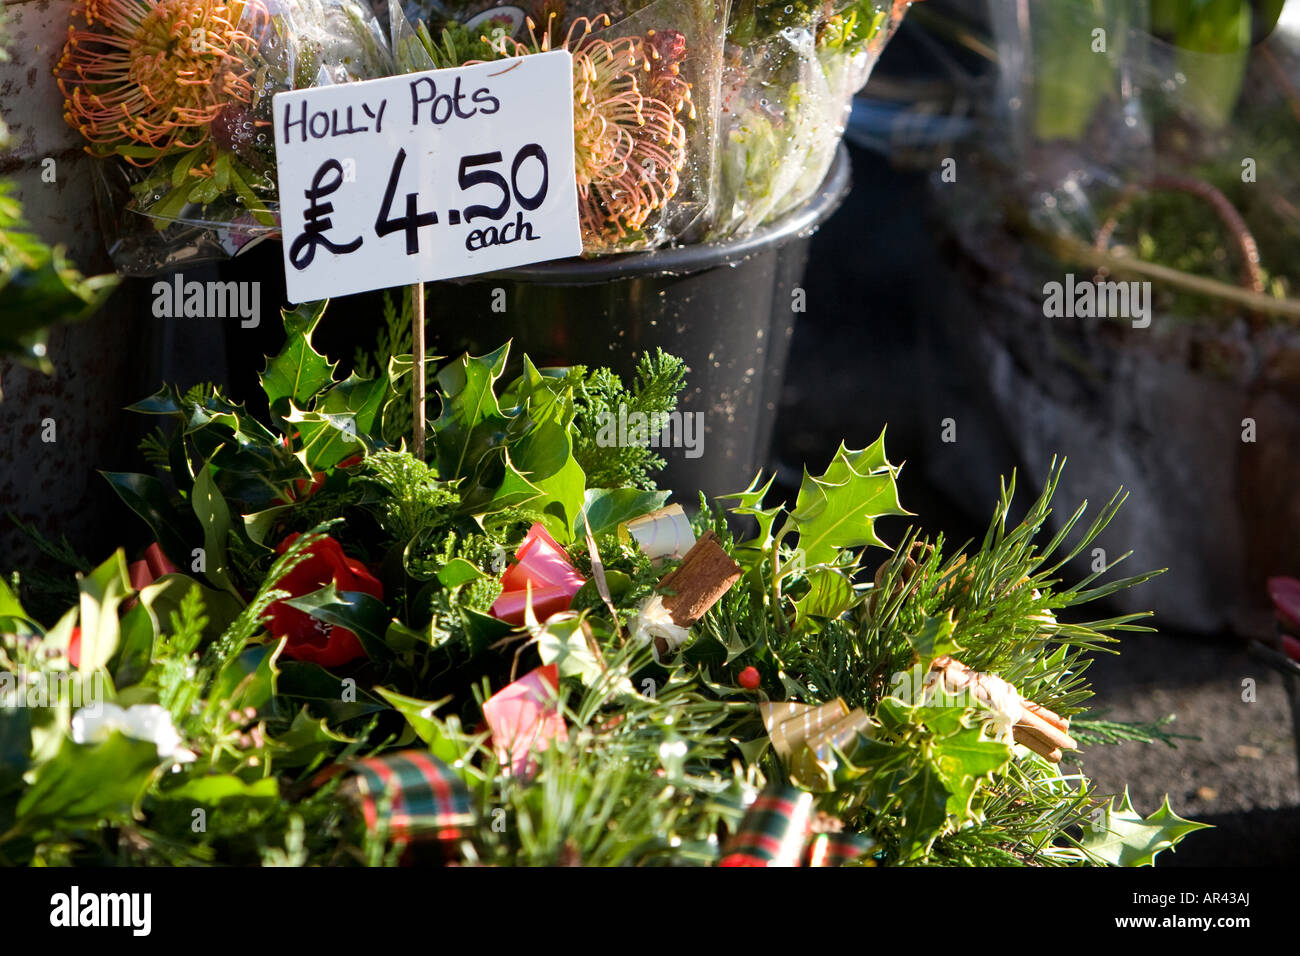 Holly pots for sale in Penrith UK 12 10 2007 Stock Photo